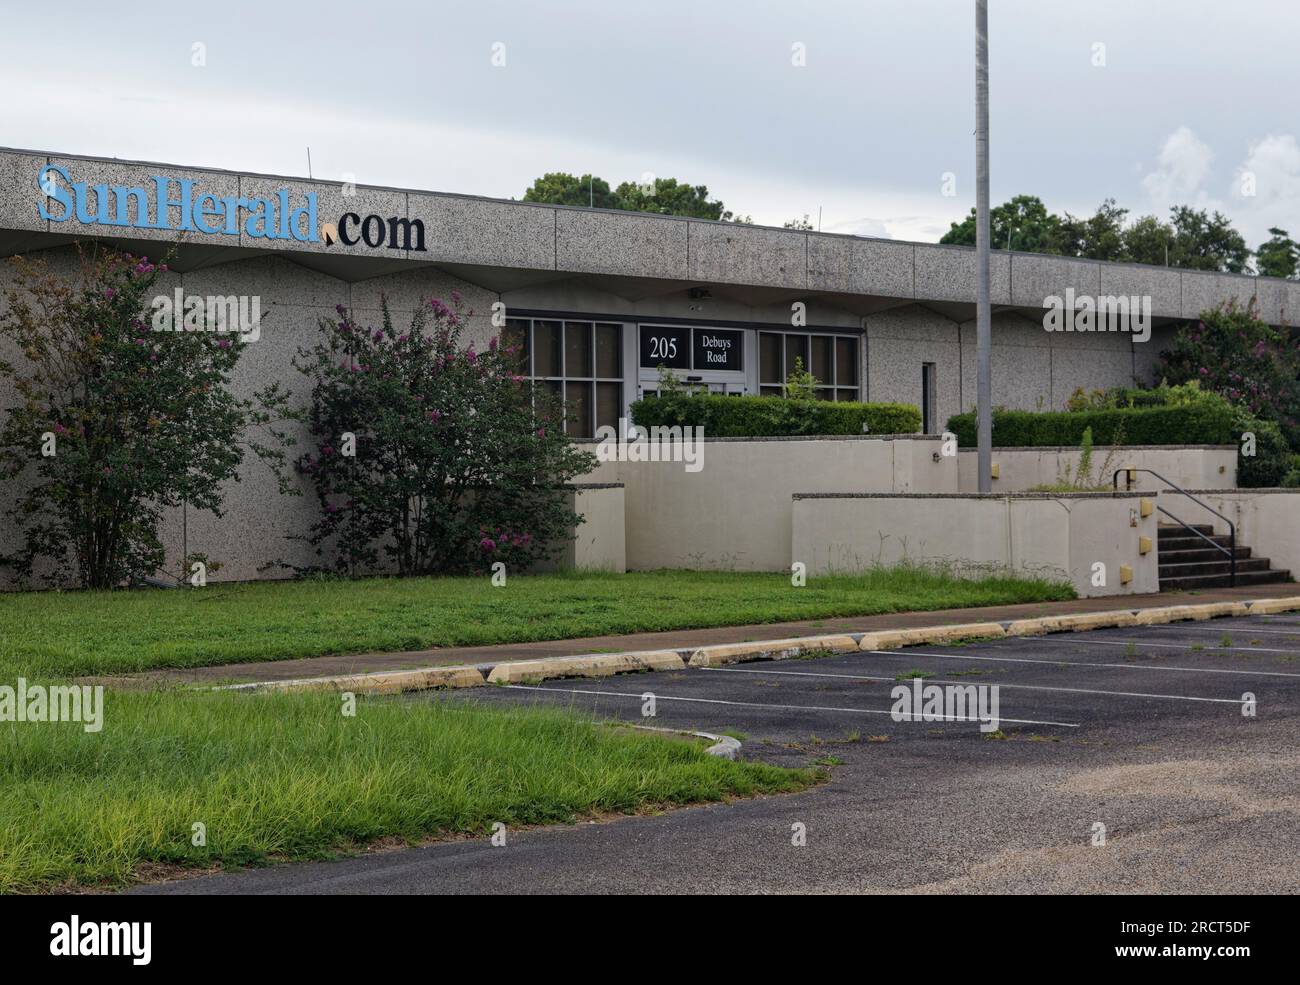 The Sun Herald newspaper building at 205 DeBuys Rd. sets empty on Saturday, July 17, 2021 in Gulfport, Harrison County, MS, USA. Built in 1970, the nearly 87,000-square-foot building set on more than 18 acres and nicknamed 'Fort Weeks' after a former publisher, survived Hurricane Katrina — after which the Sun Herald received a Pulitzer Prize for its coverage — but couldn't survive acquisition by The McClatchy Company, which finished moving the newspaper's offices to a smaller, more 'cost-efficient' location in downtown Gulfport in mid-April, 2020. (Apex MediaWire Photo by Billy Suratt) Stock Photo